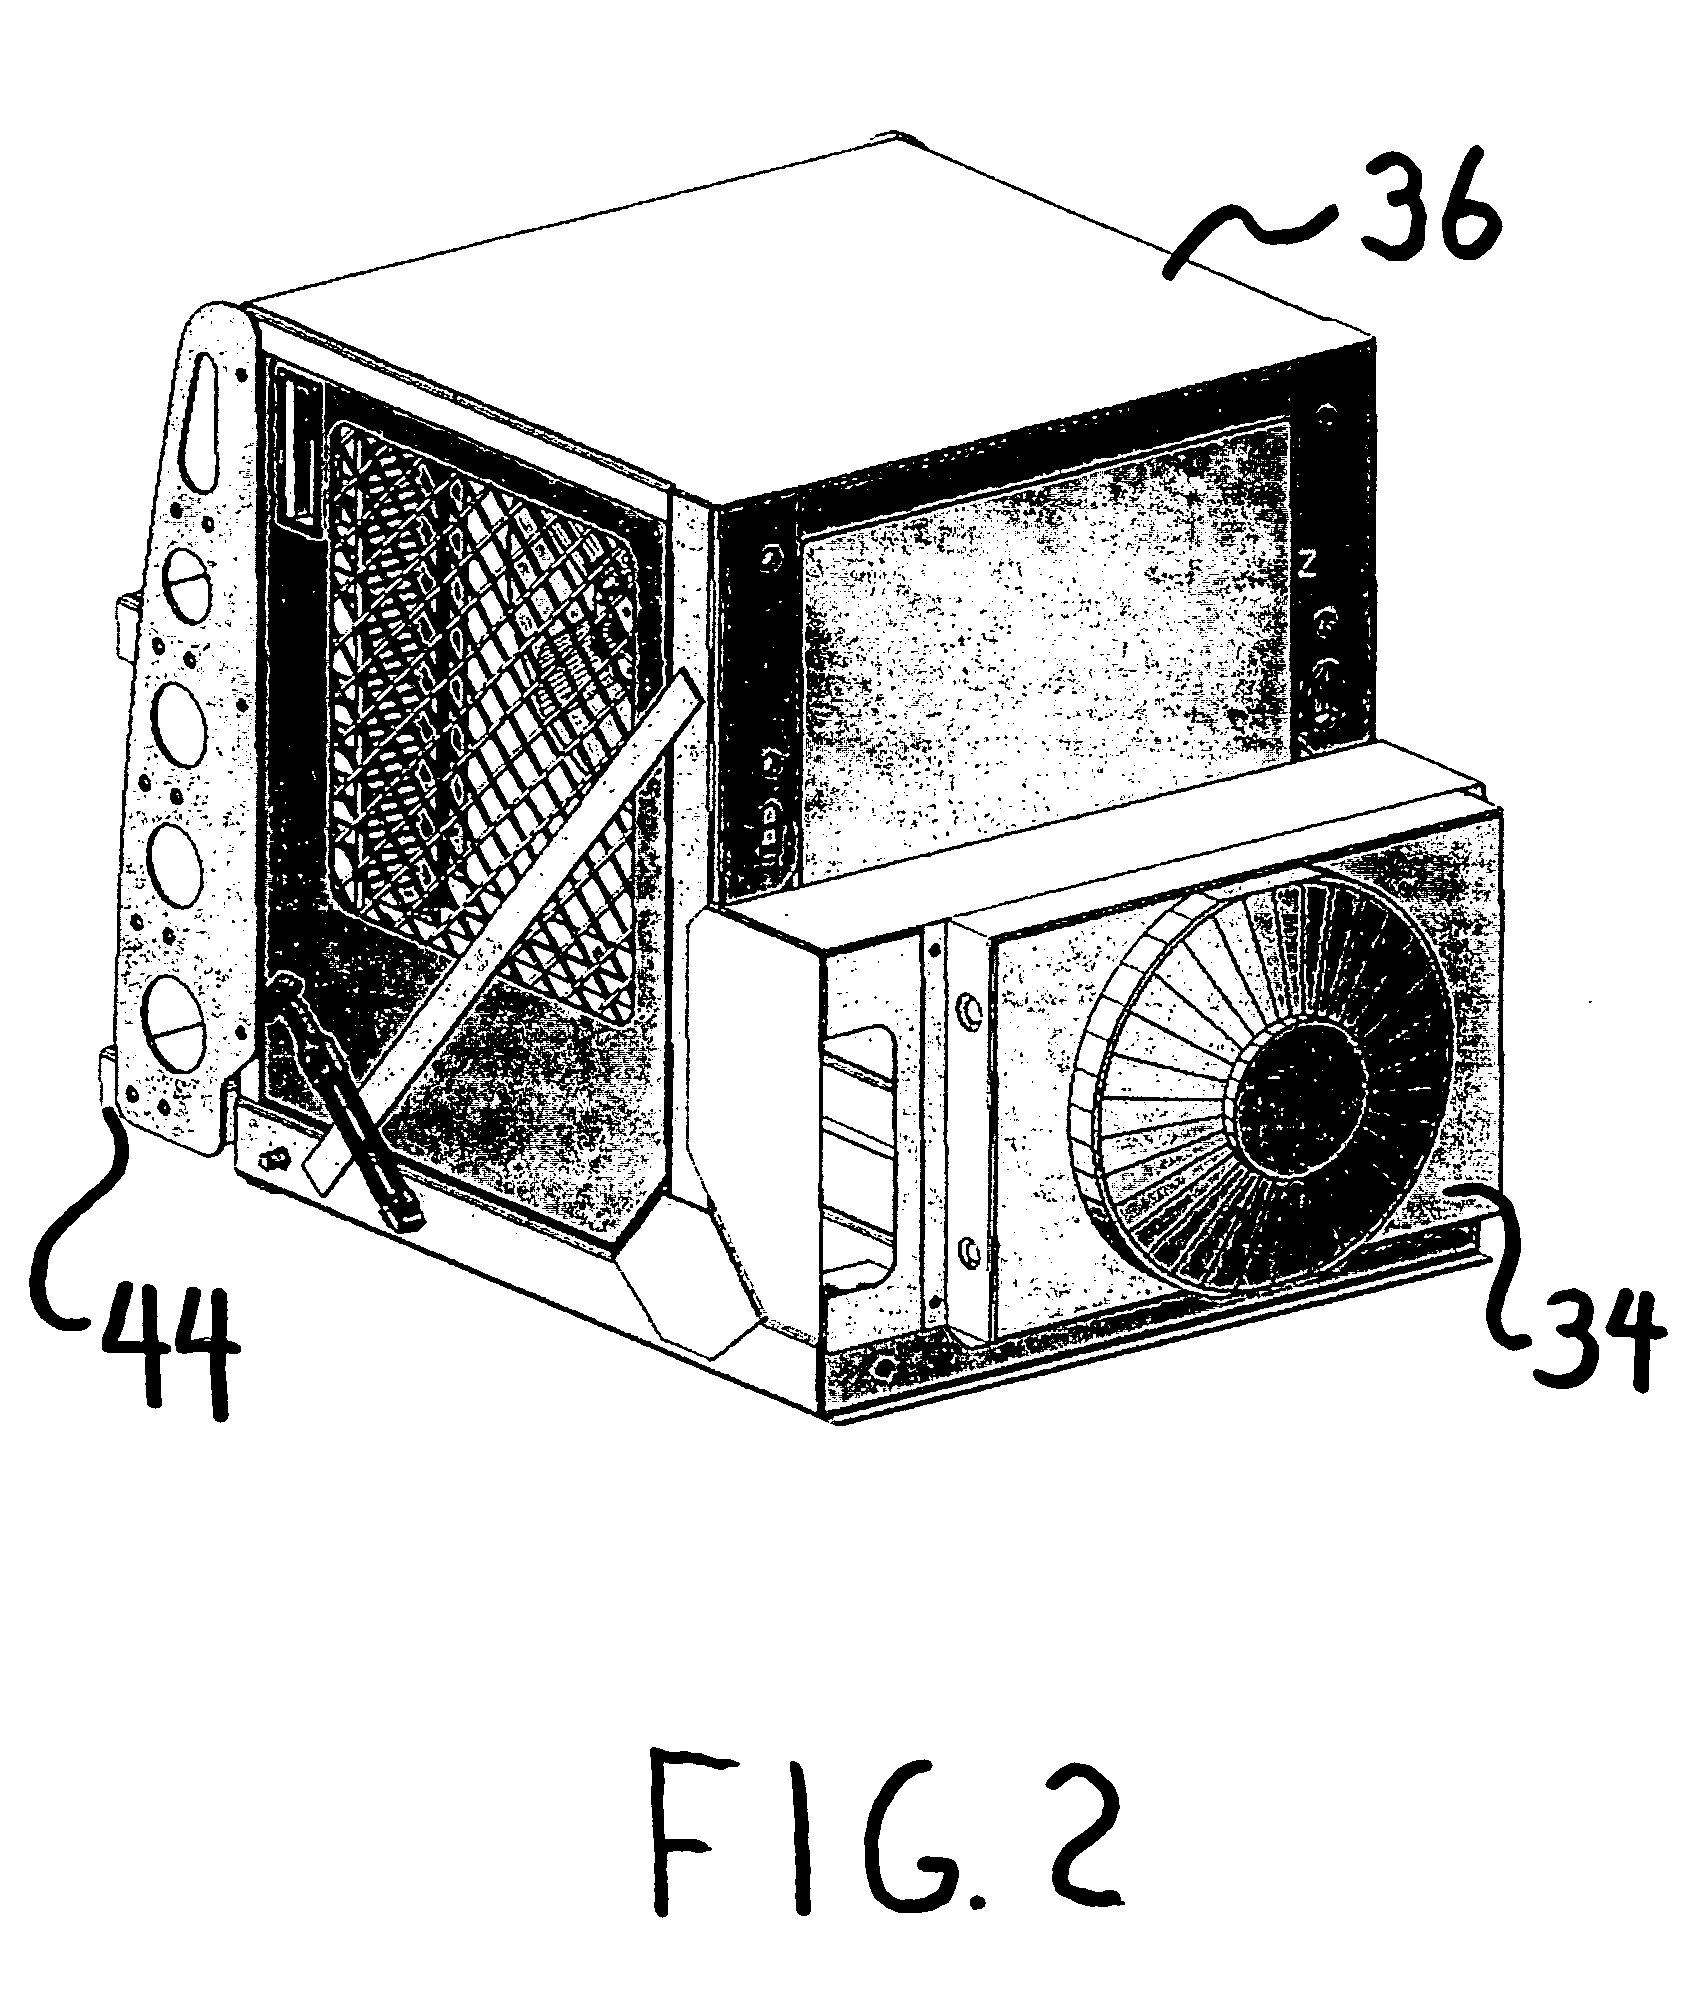 Auxiliary power unit for transportation vehicle